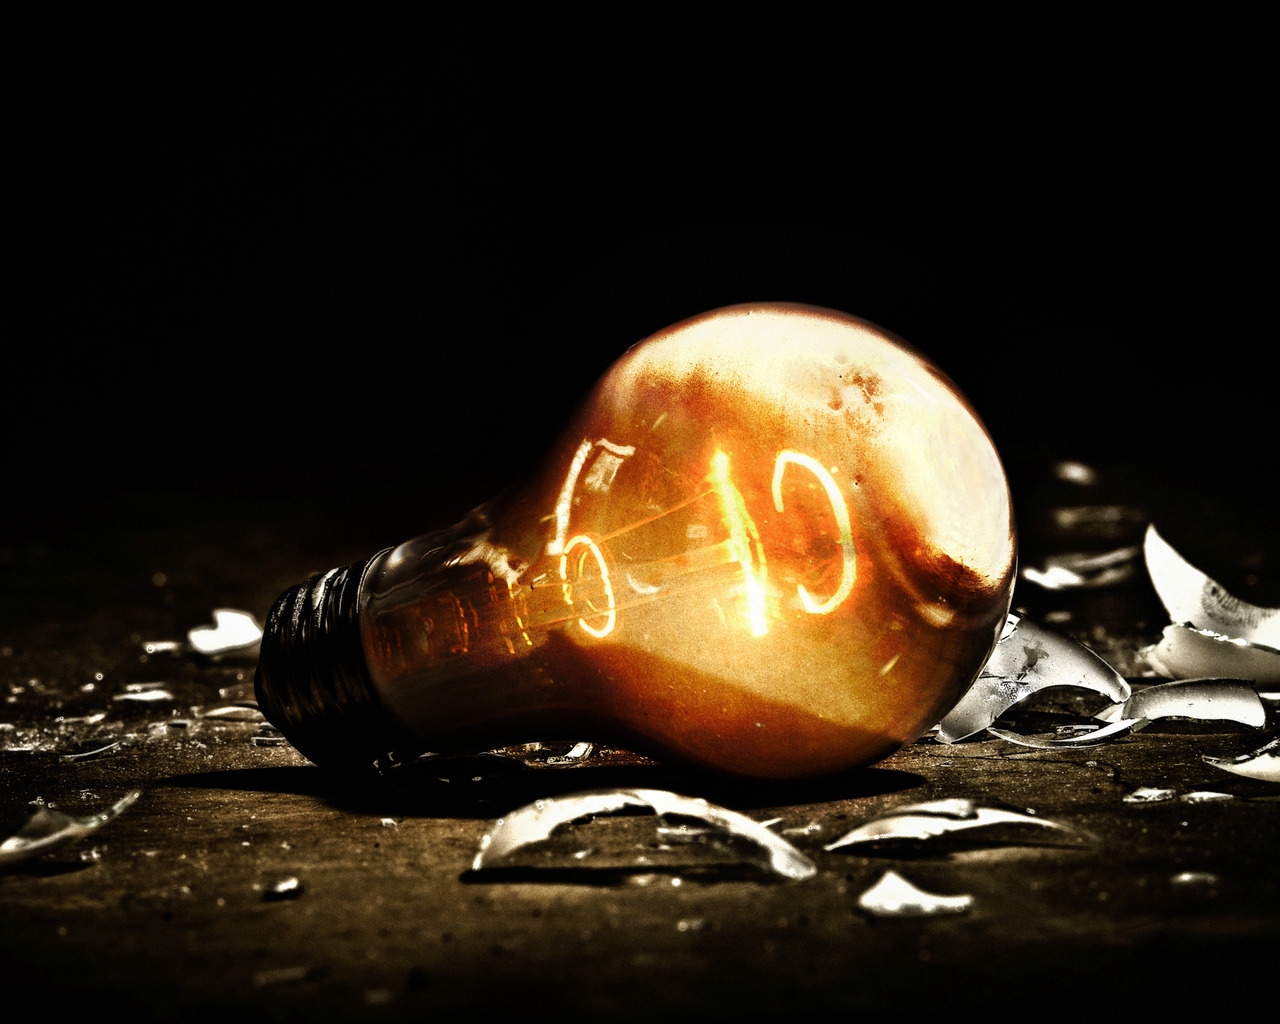 Bulb Lit for 1280 x 1024 resolution